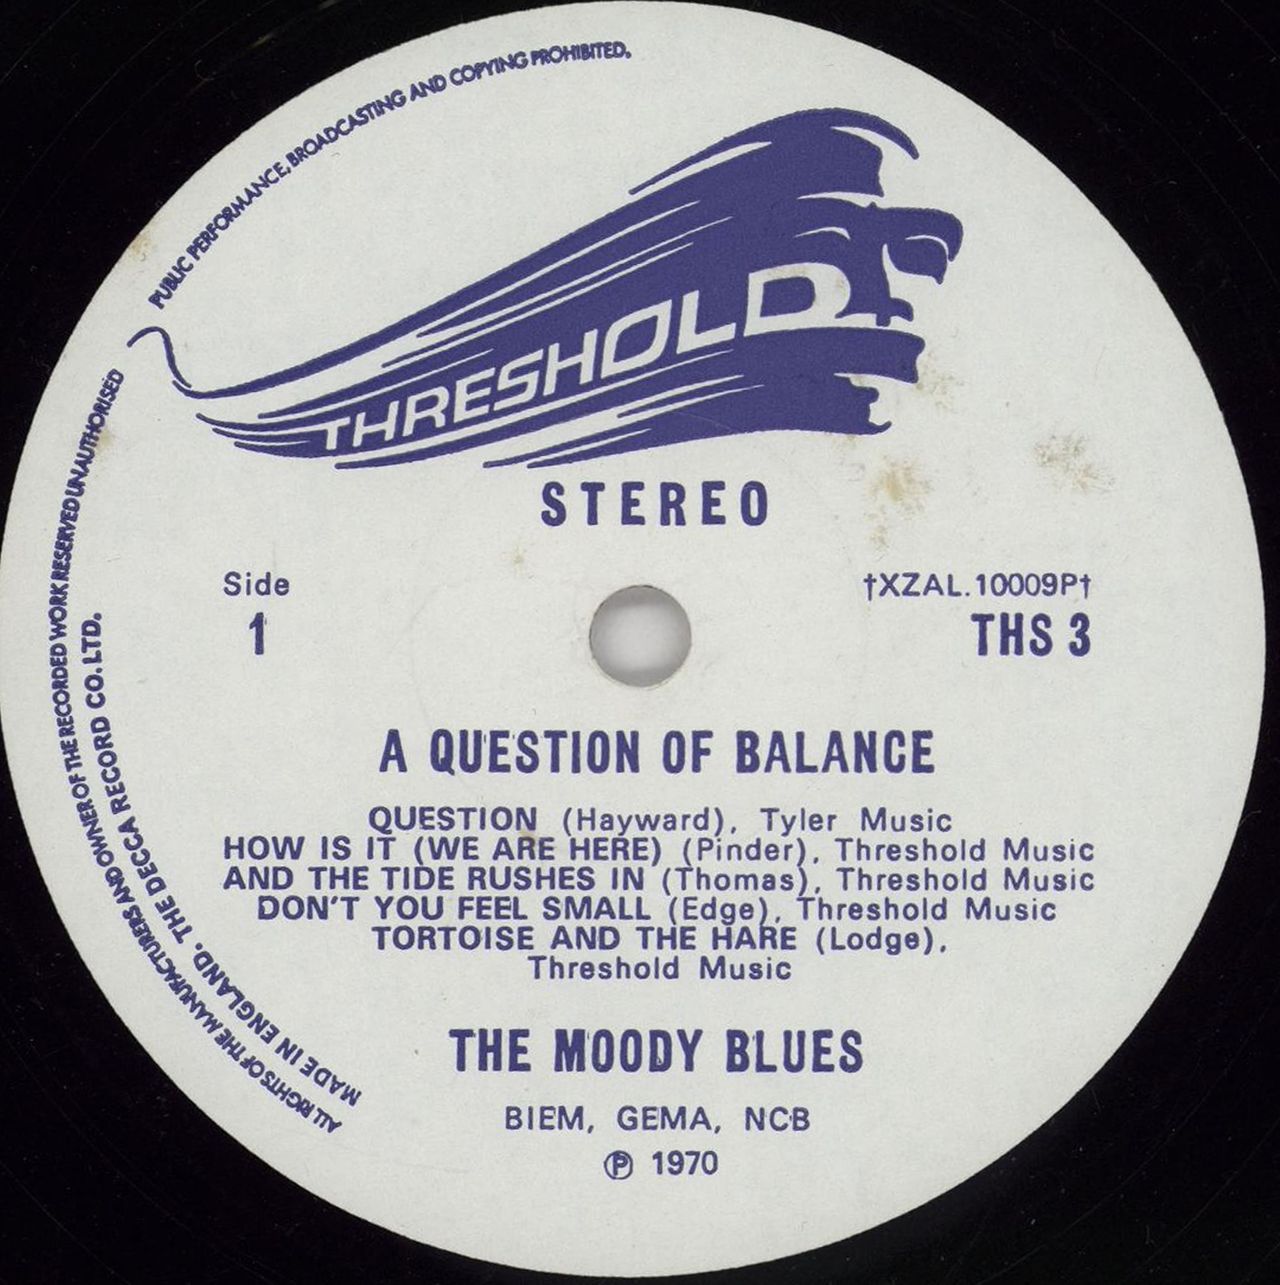 The Moody Blues A Question Of Balance - 2nd - EX UK Vinyl LP